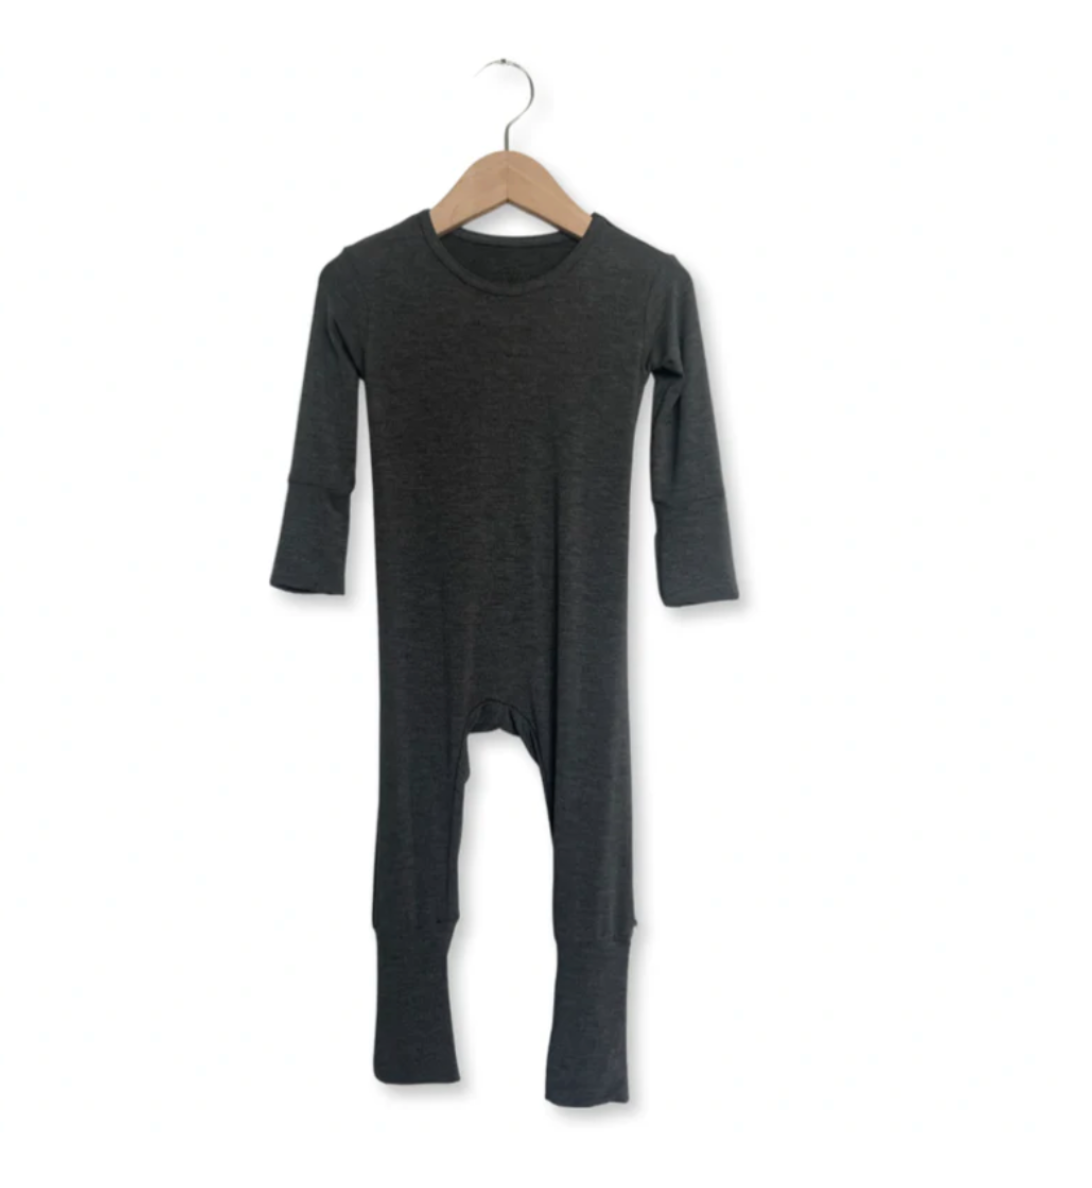 Charcoal At Your Leisure Essential Adult Romper- 3X-5X